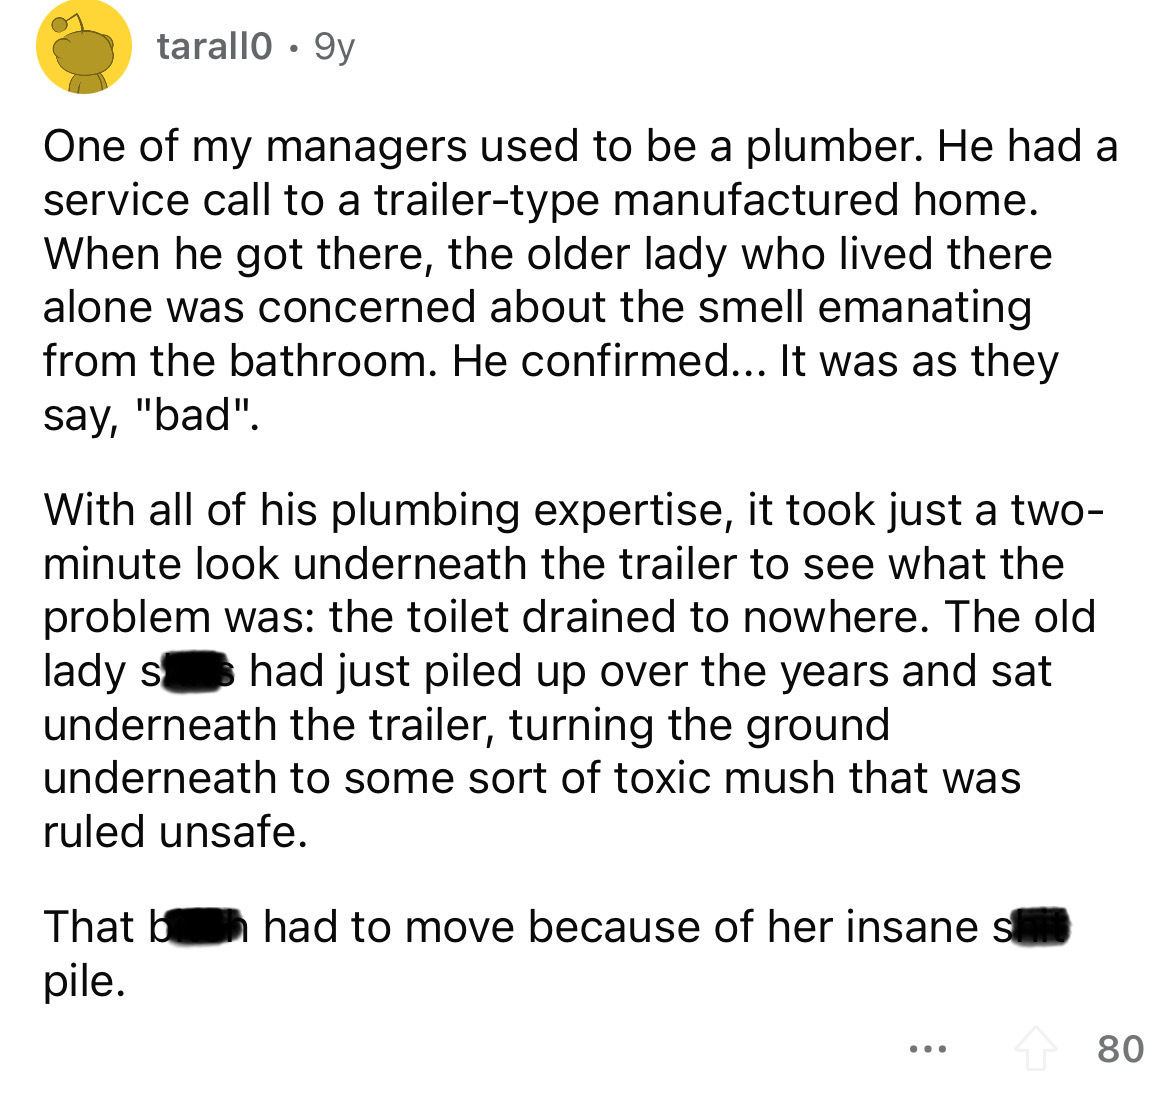 writing 1 page - tarallo 9y One of my managers used to be a plumber. He had a service call to a trailertype manufactured home. When he got there, the older lady who lived there alone was concerned about the smell emanating from the bathroom. He confirmed.